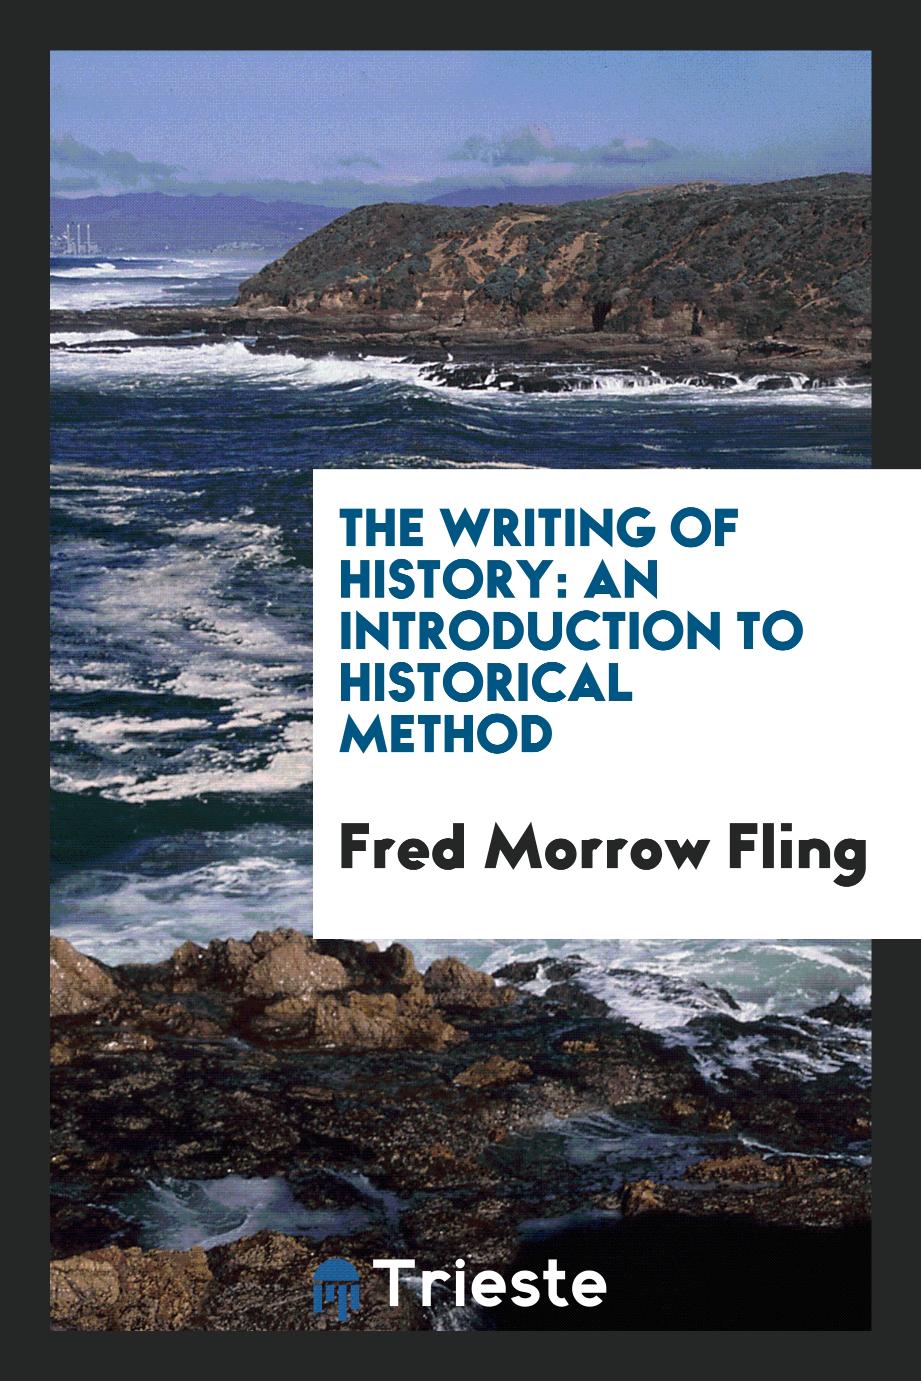 The writing of history: an introduction to historical method